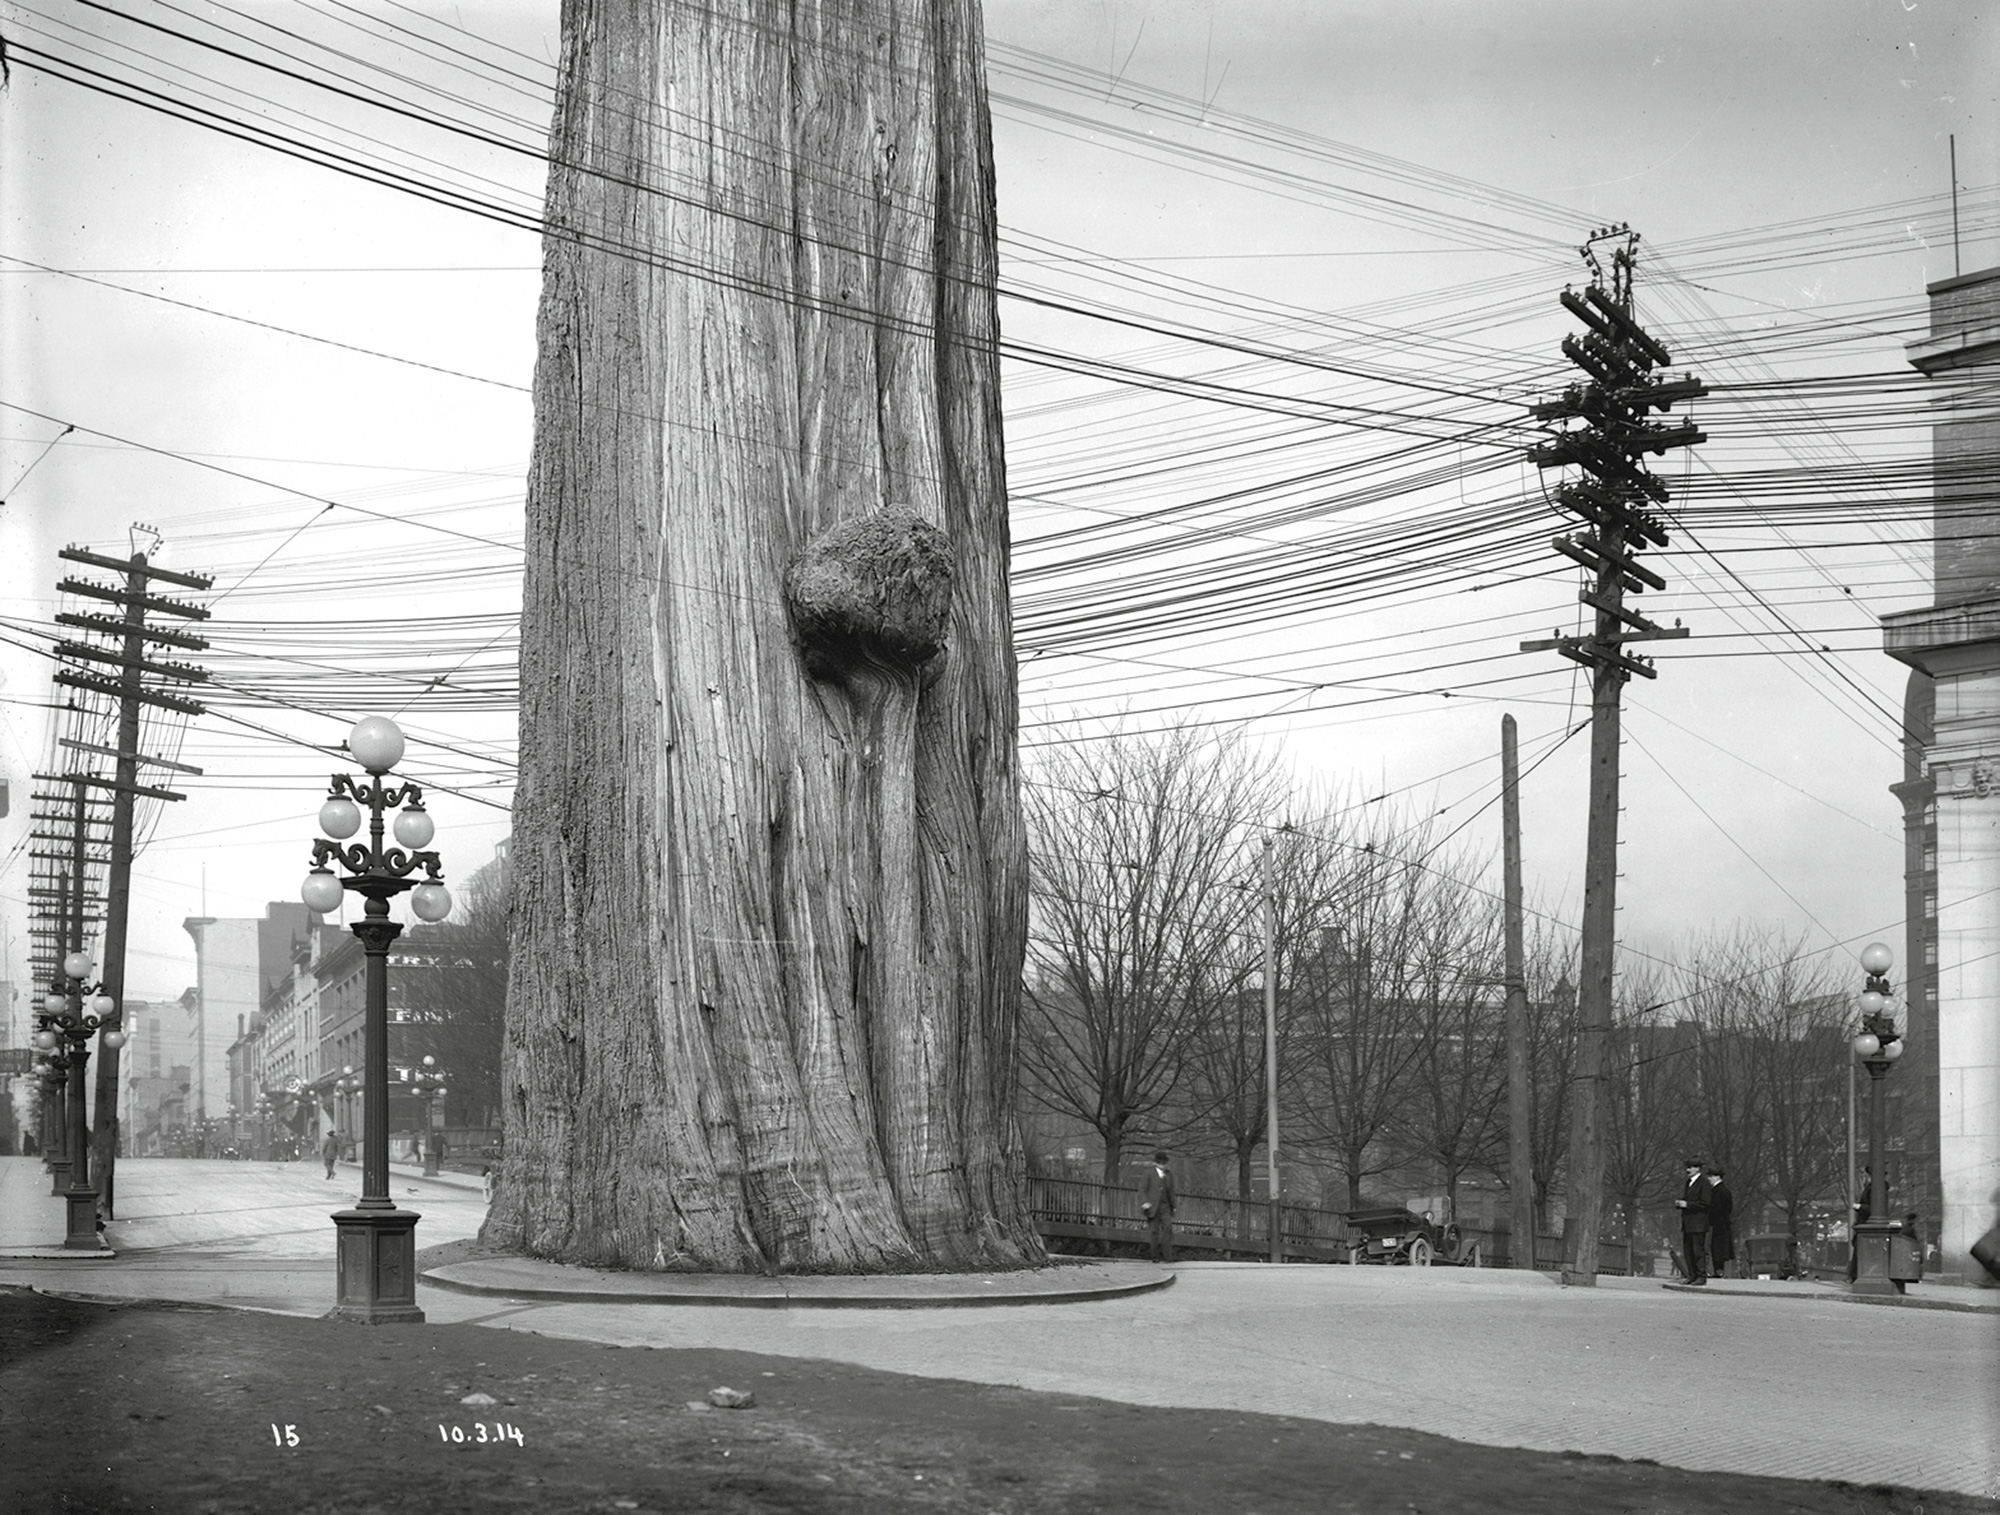 A photograph titled “Roundabout Vancouver: Wires, circa nineteen fourteen.” It shows a large tree surrounded by electrical wires.